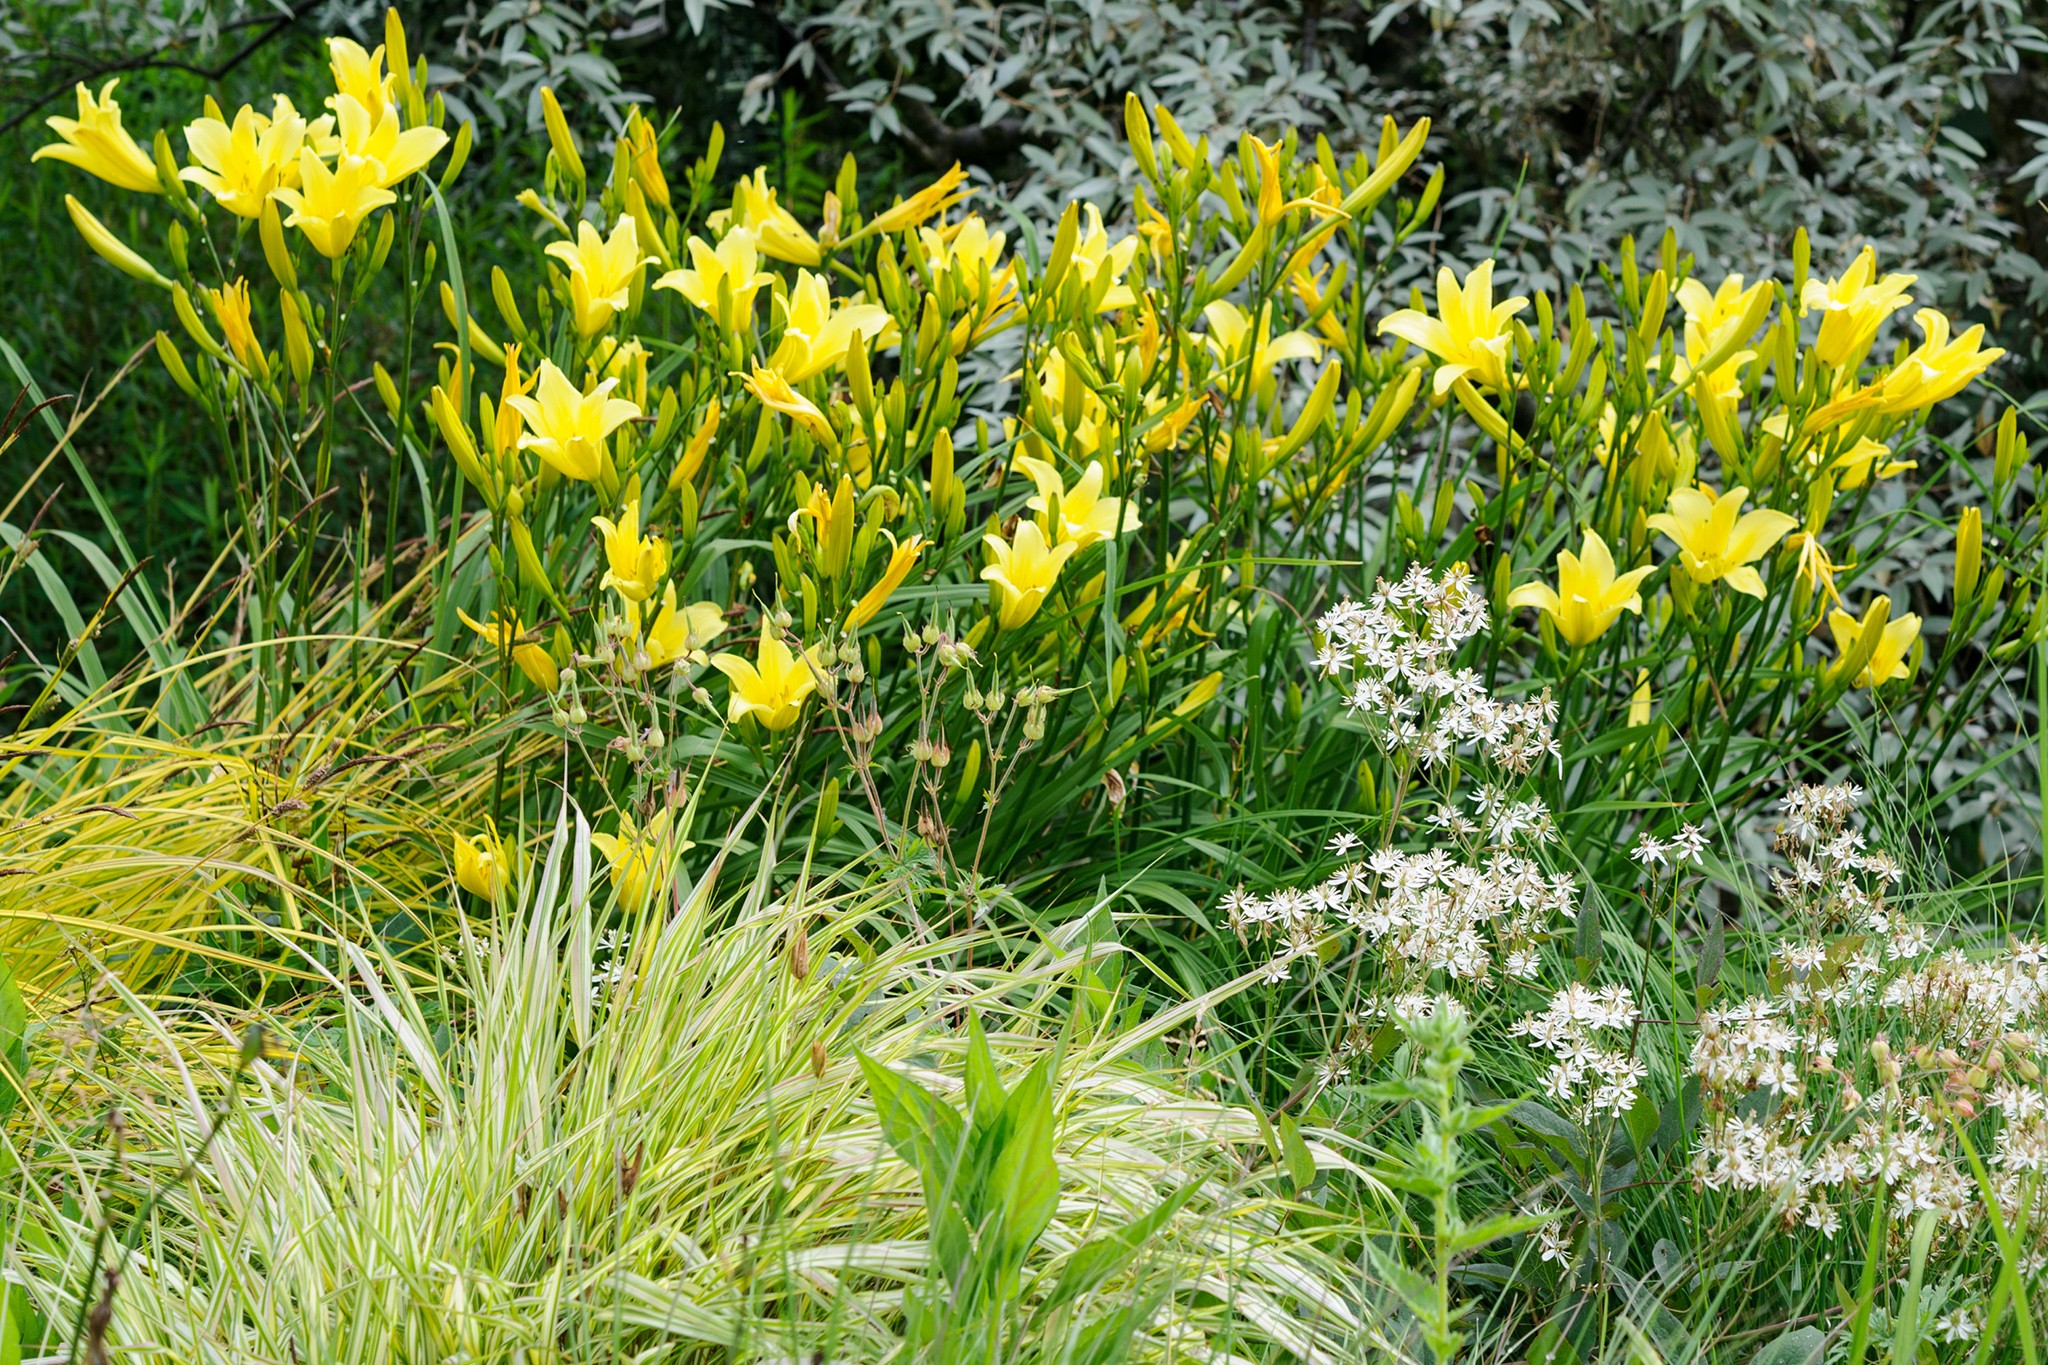 Daylily and Bowles’s golden sedge